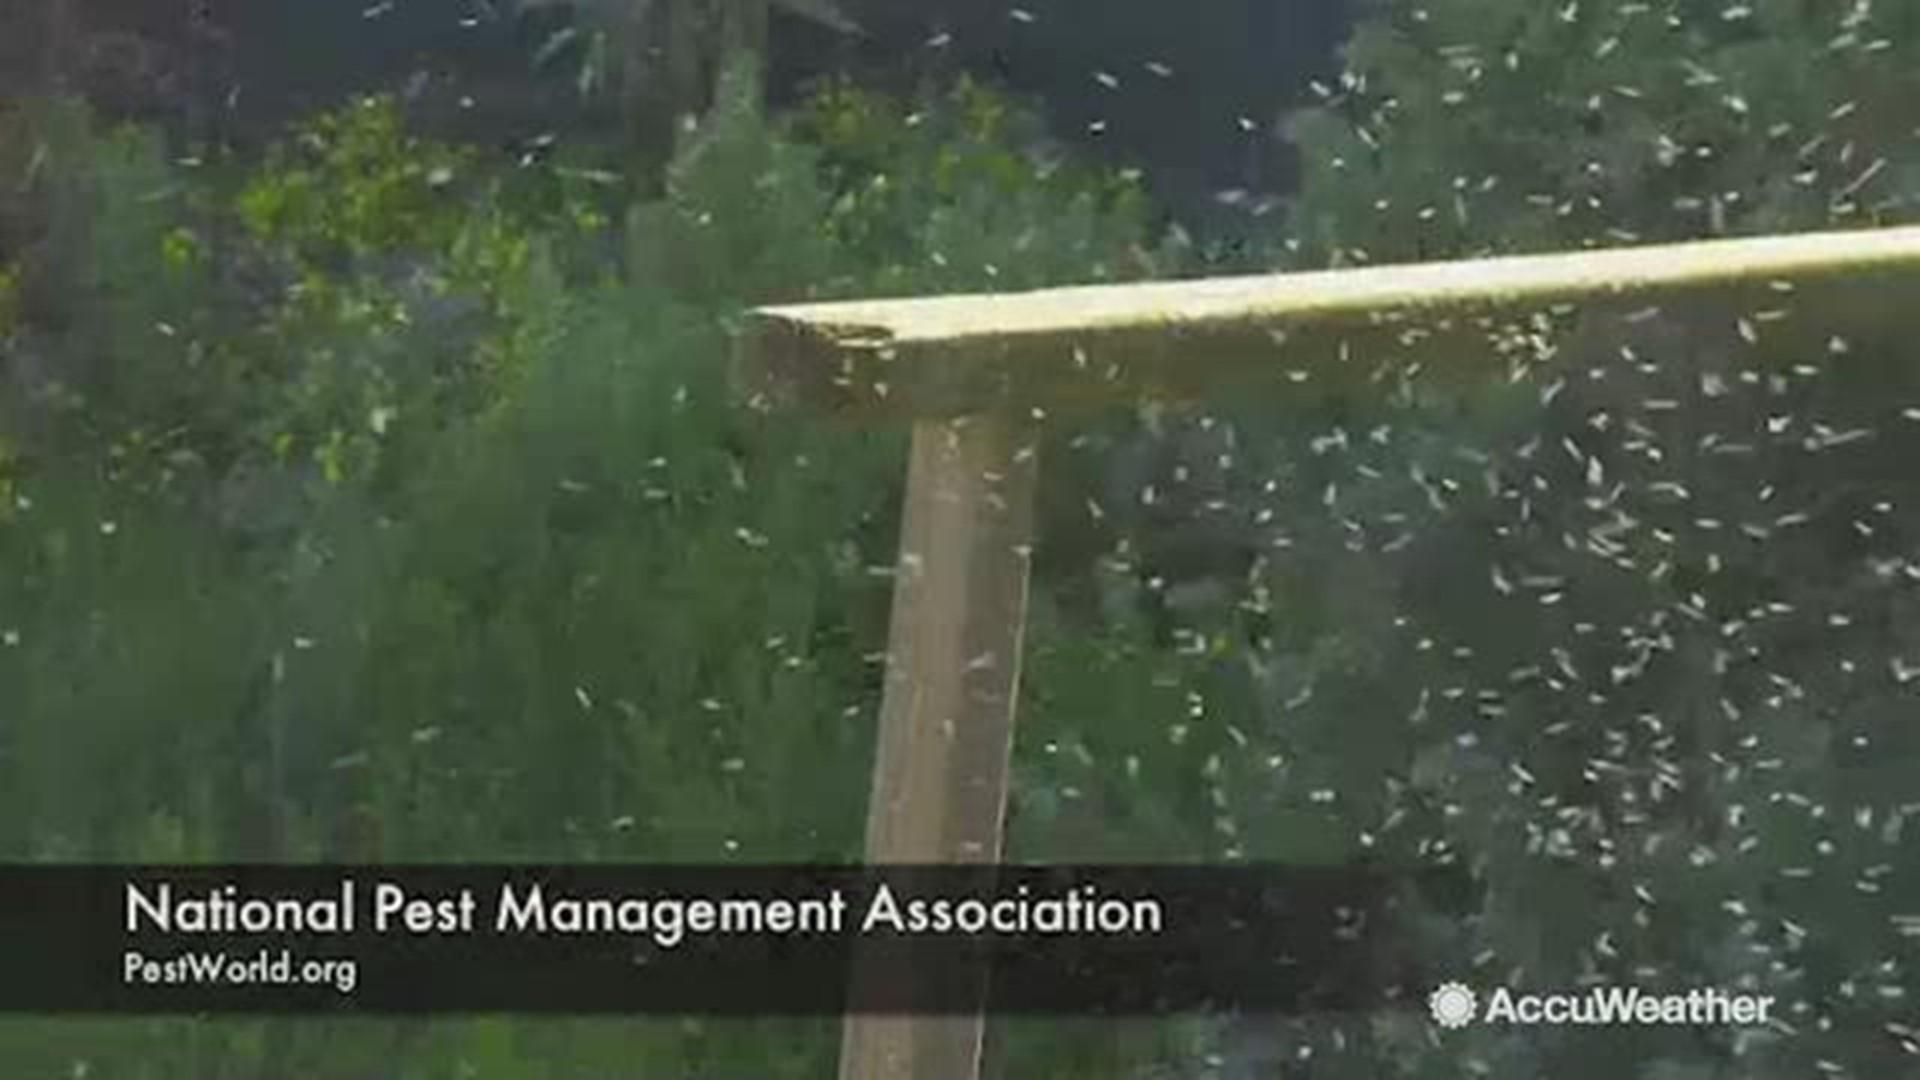 Heavy spring rainfall in parts of the mid-Atlantic have triggered higher-than-average mosquito rates this season. It is estimated that mosquitoes are two to three times their normal rates.